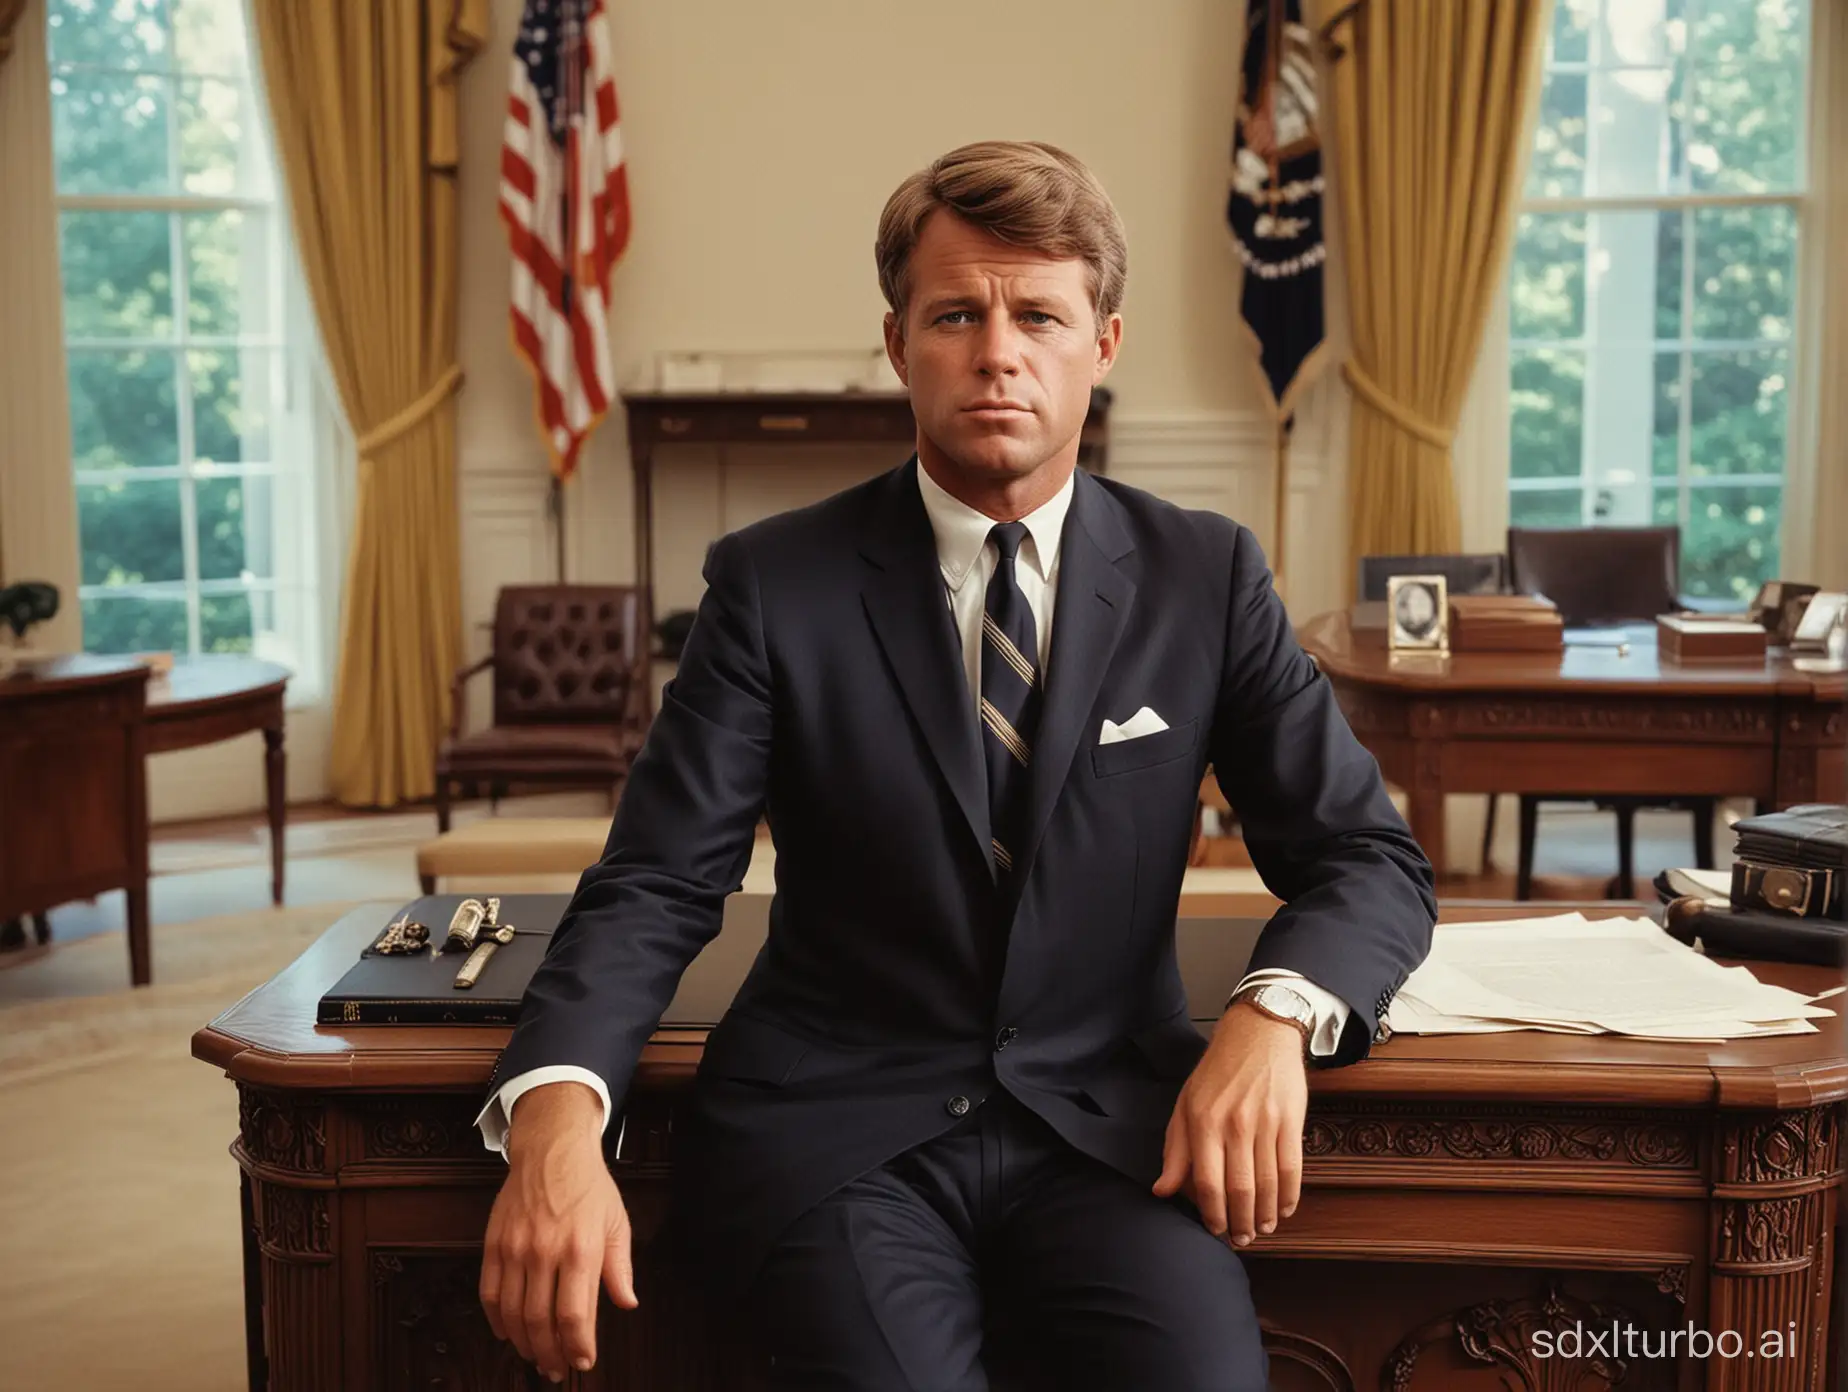 Robert-F-Kennedy-Presidential-Portrait-in-White-House-Oval-Office